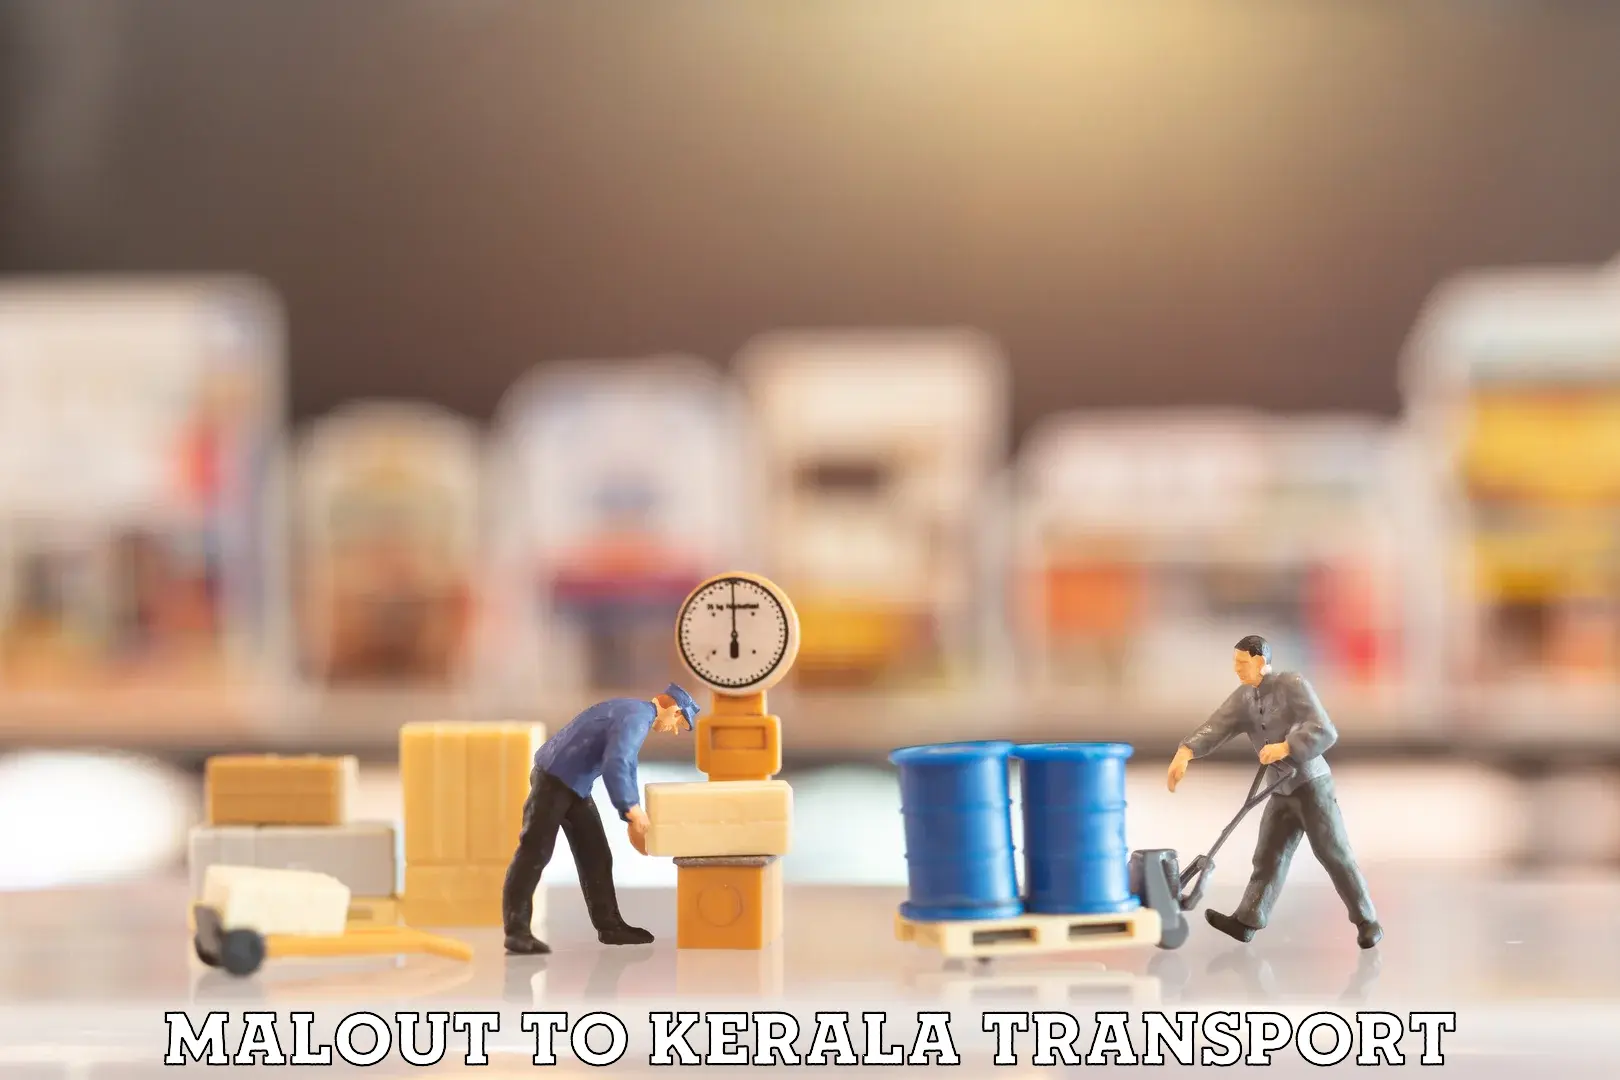 Daily parcel service transport Malout to Cochin Port Kochi